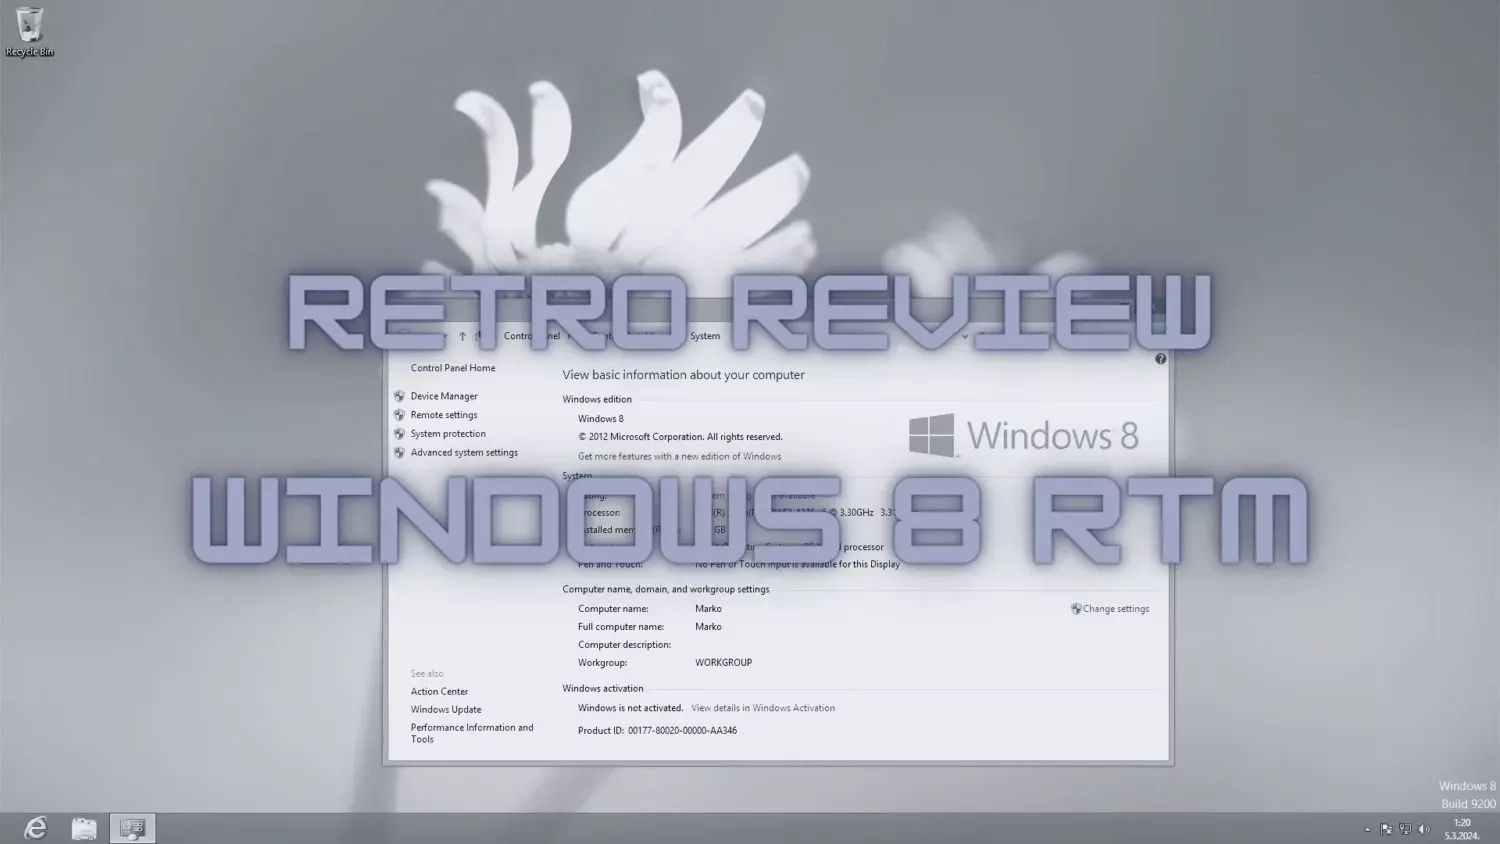 WIndows 8 RTM Retro Review and Throwback